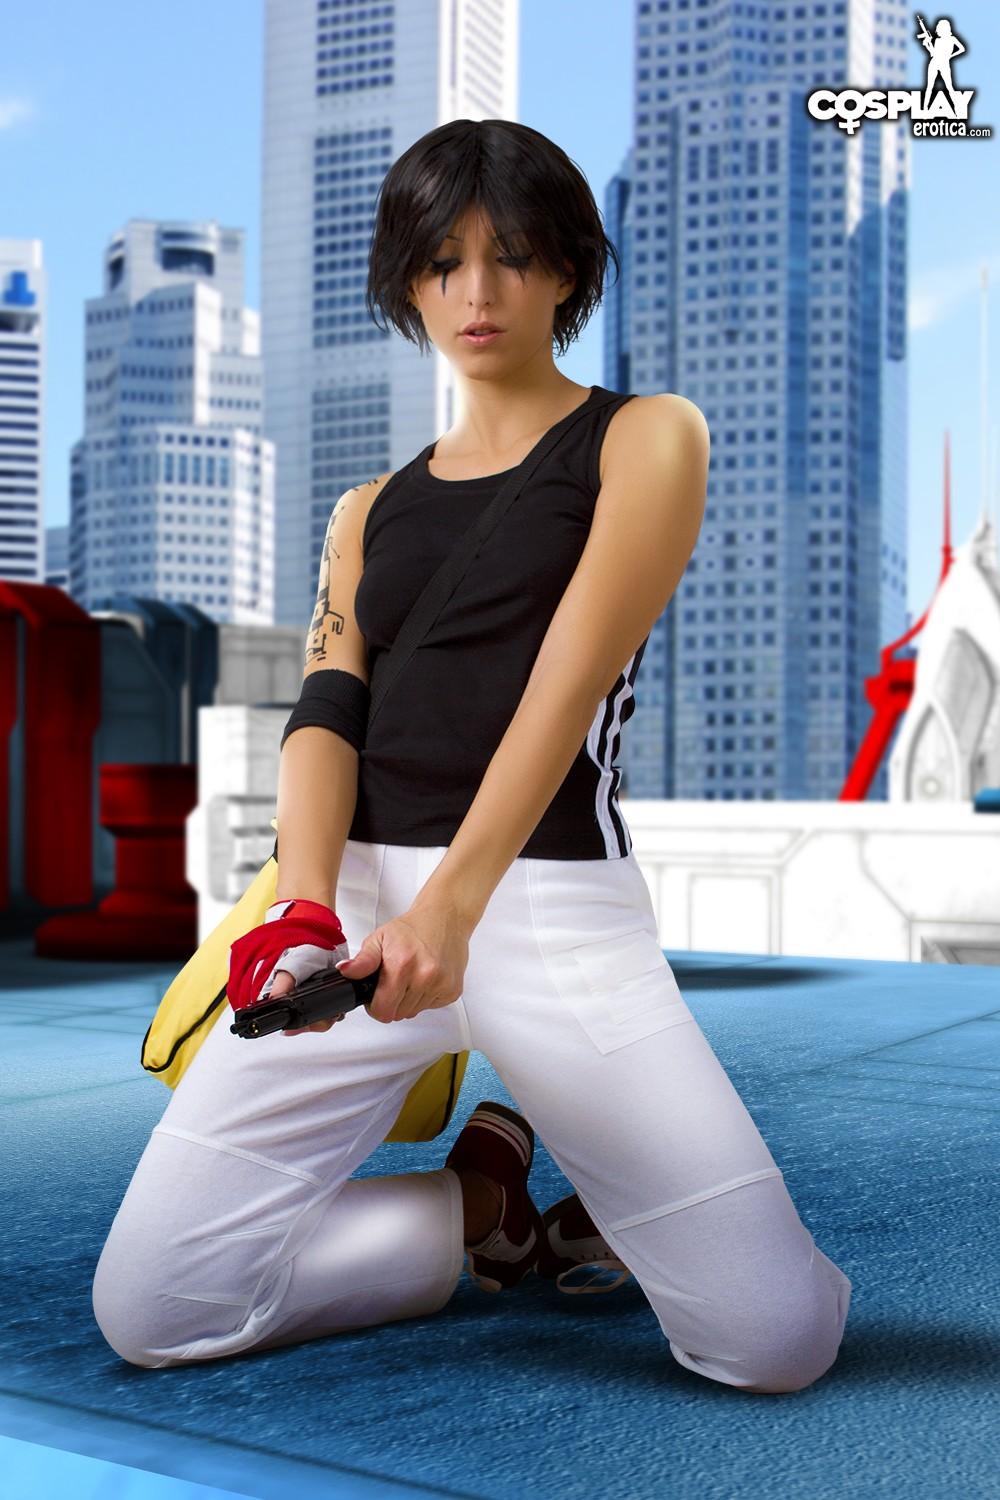 Sexy cosplay girl Anne poses as Faith from Mirror's Edge #53248478